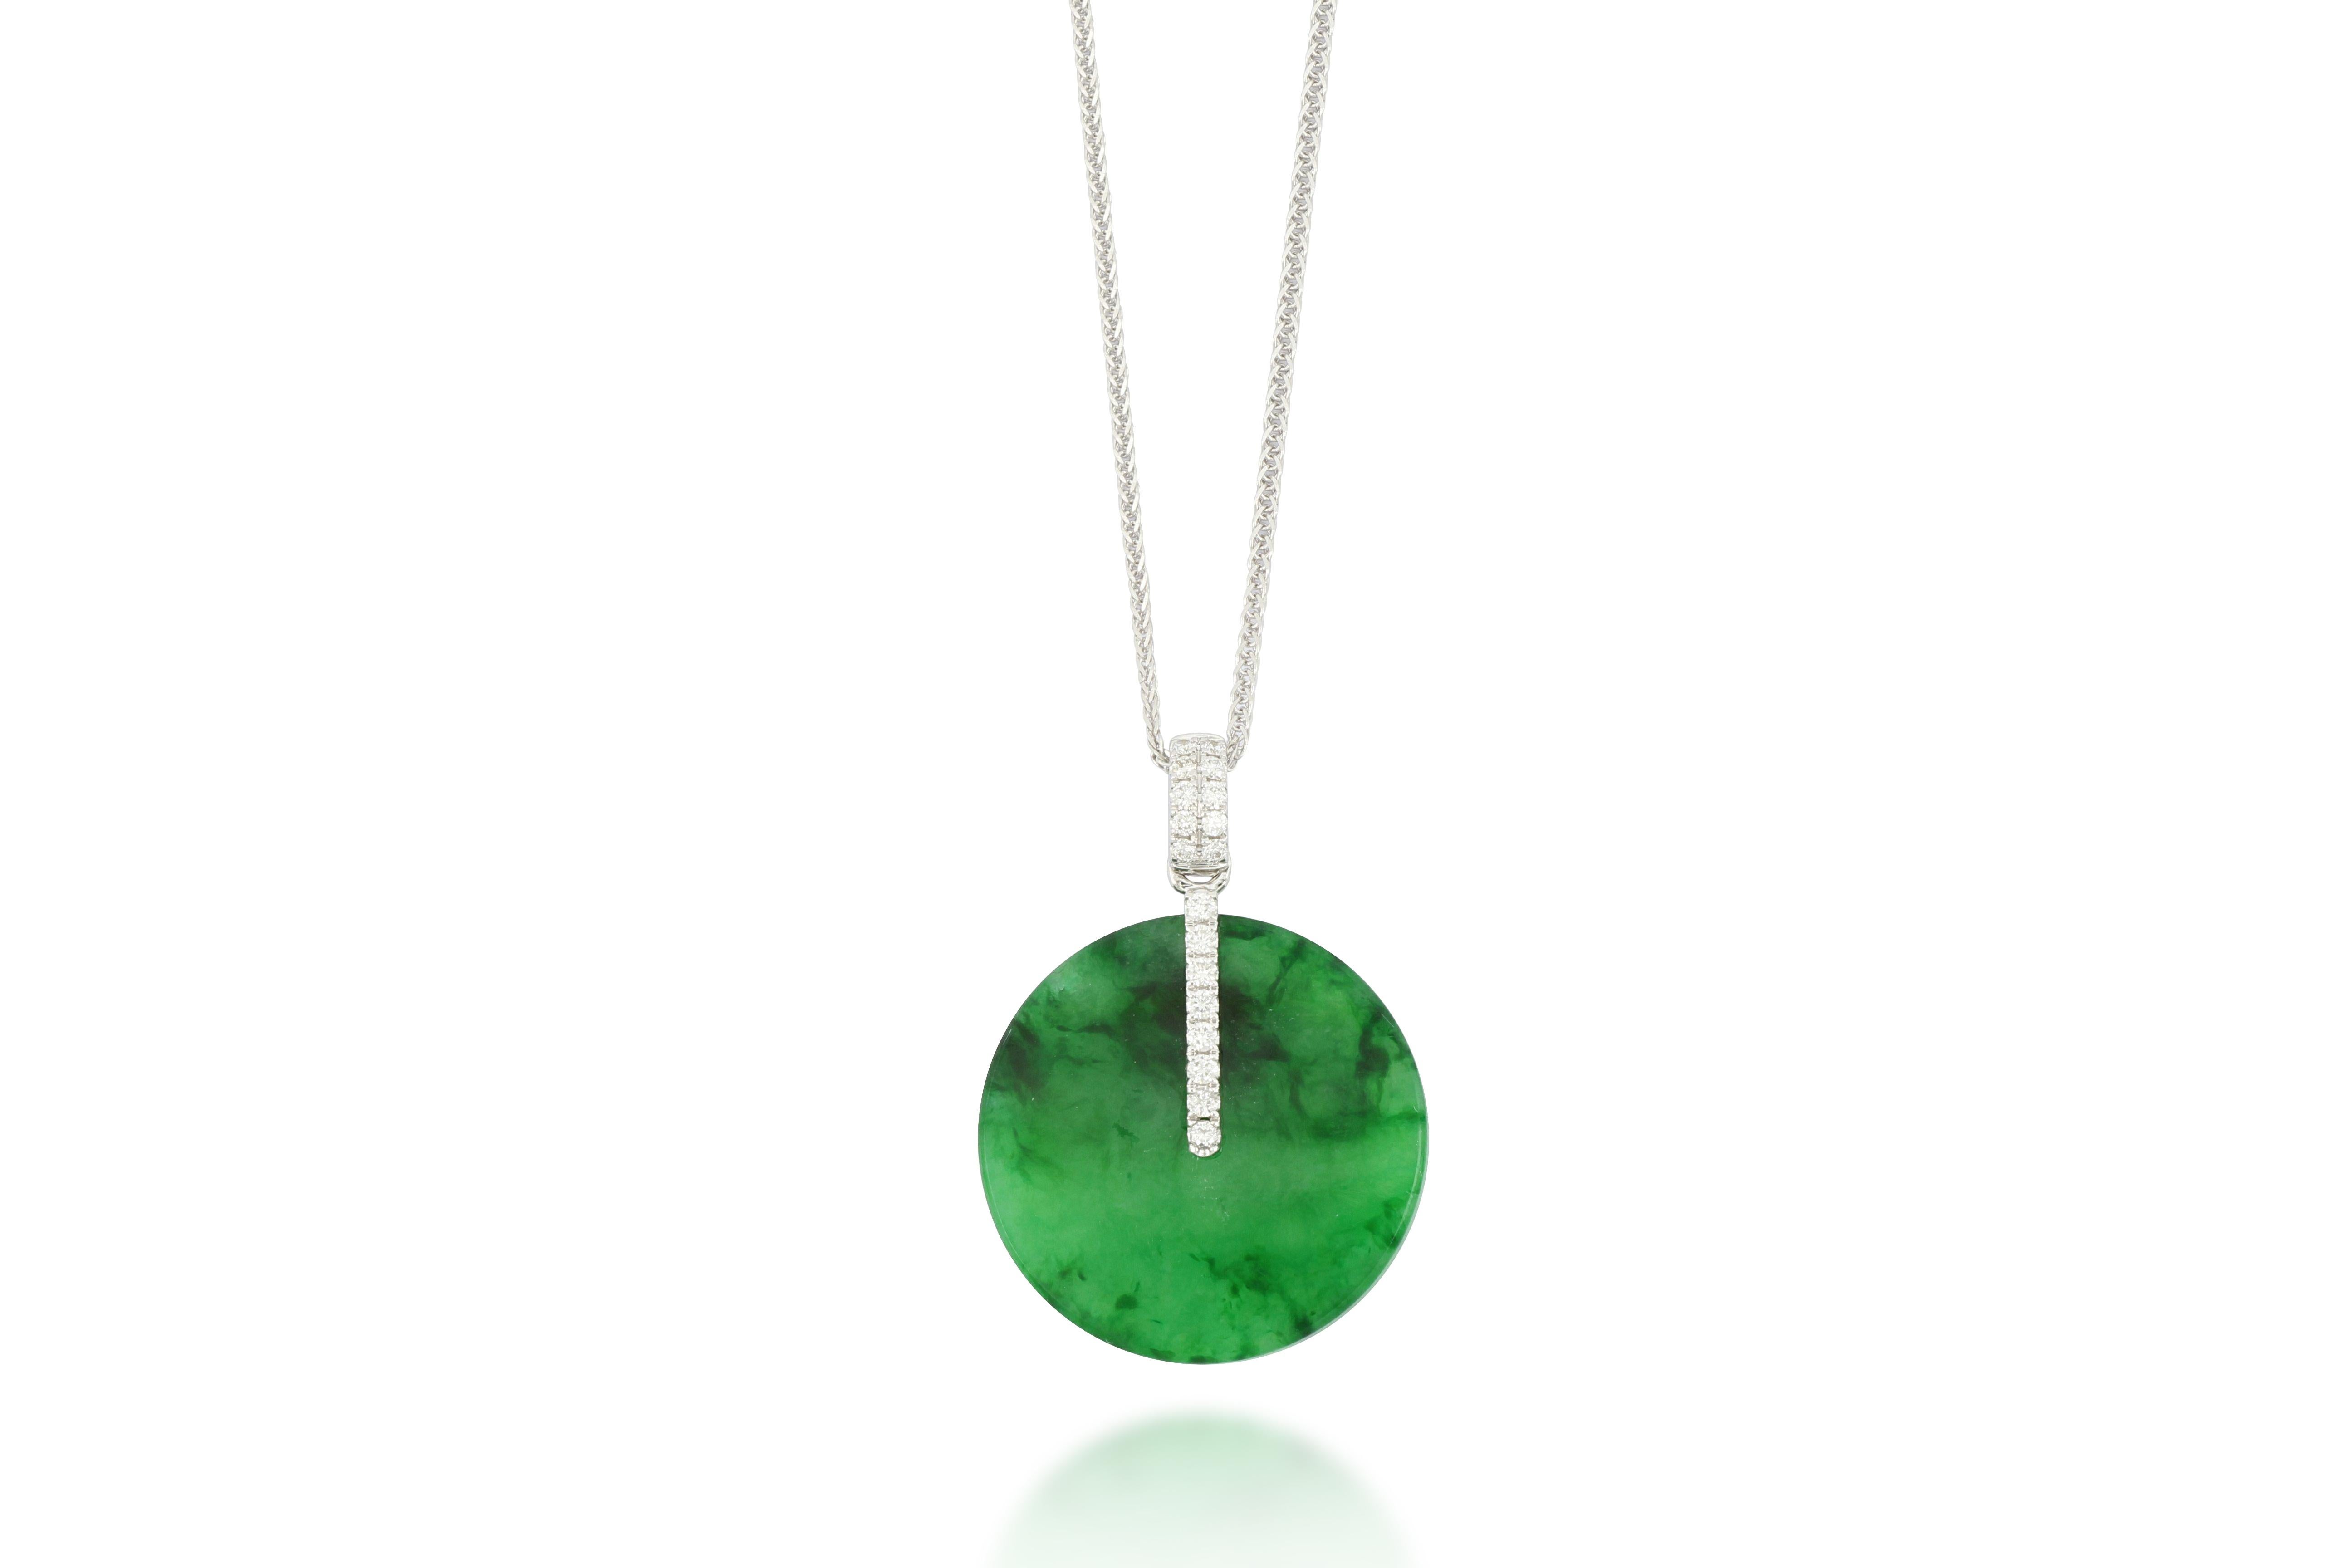 A translucent emerald green natural jadeite pendant in perfect round shape, decorated with round brilliant-cut diamonds, weighing 0.19 carats in total, mounted in 18 karat white gold. 

The company was founded one and a half centuries ago in Macau.